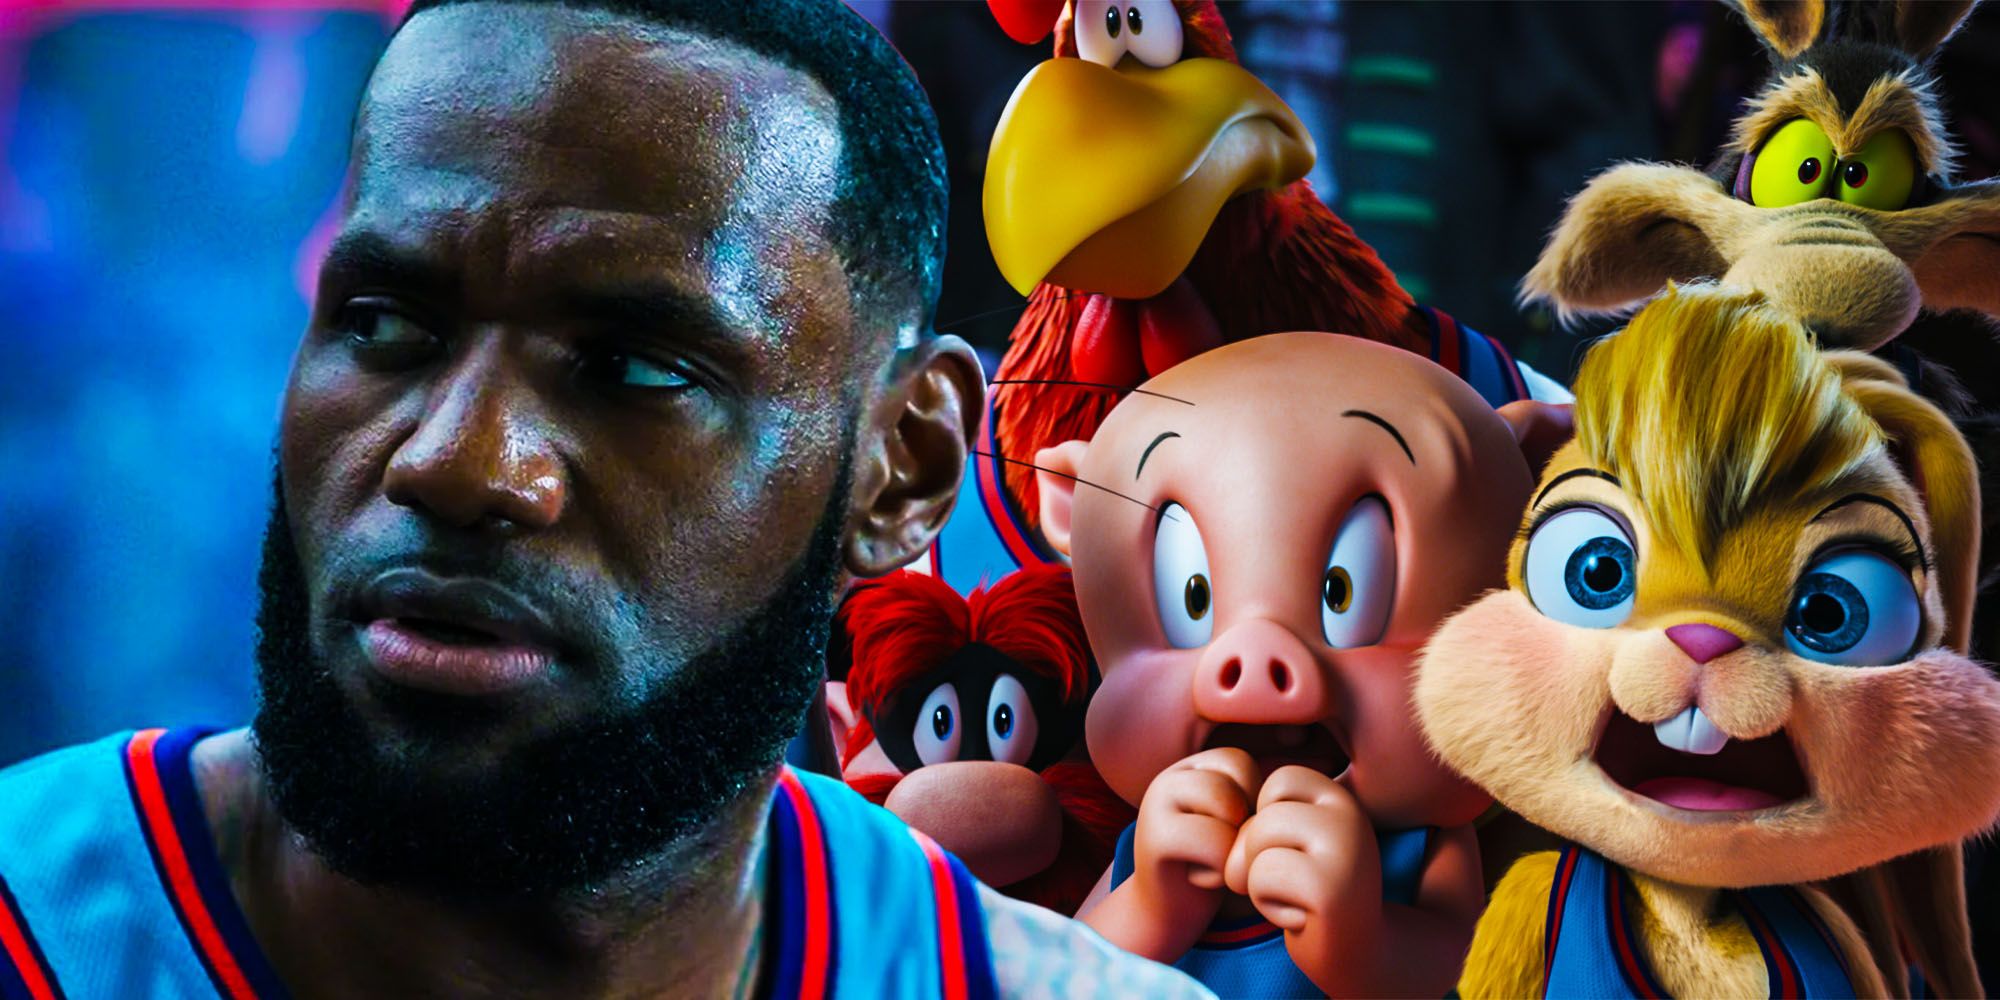 What Space Jam 2 Flopping Means For LeBron James Movie Star Future